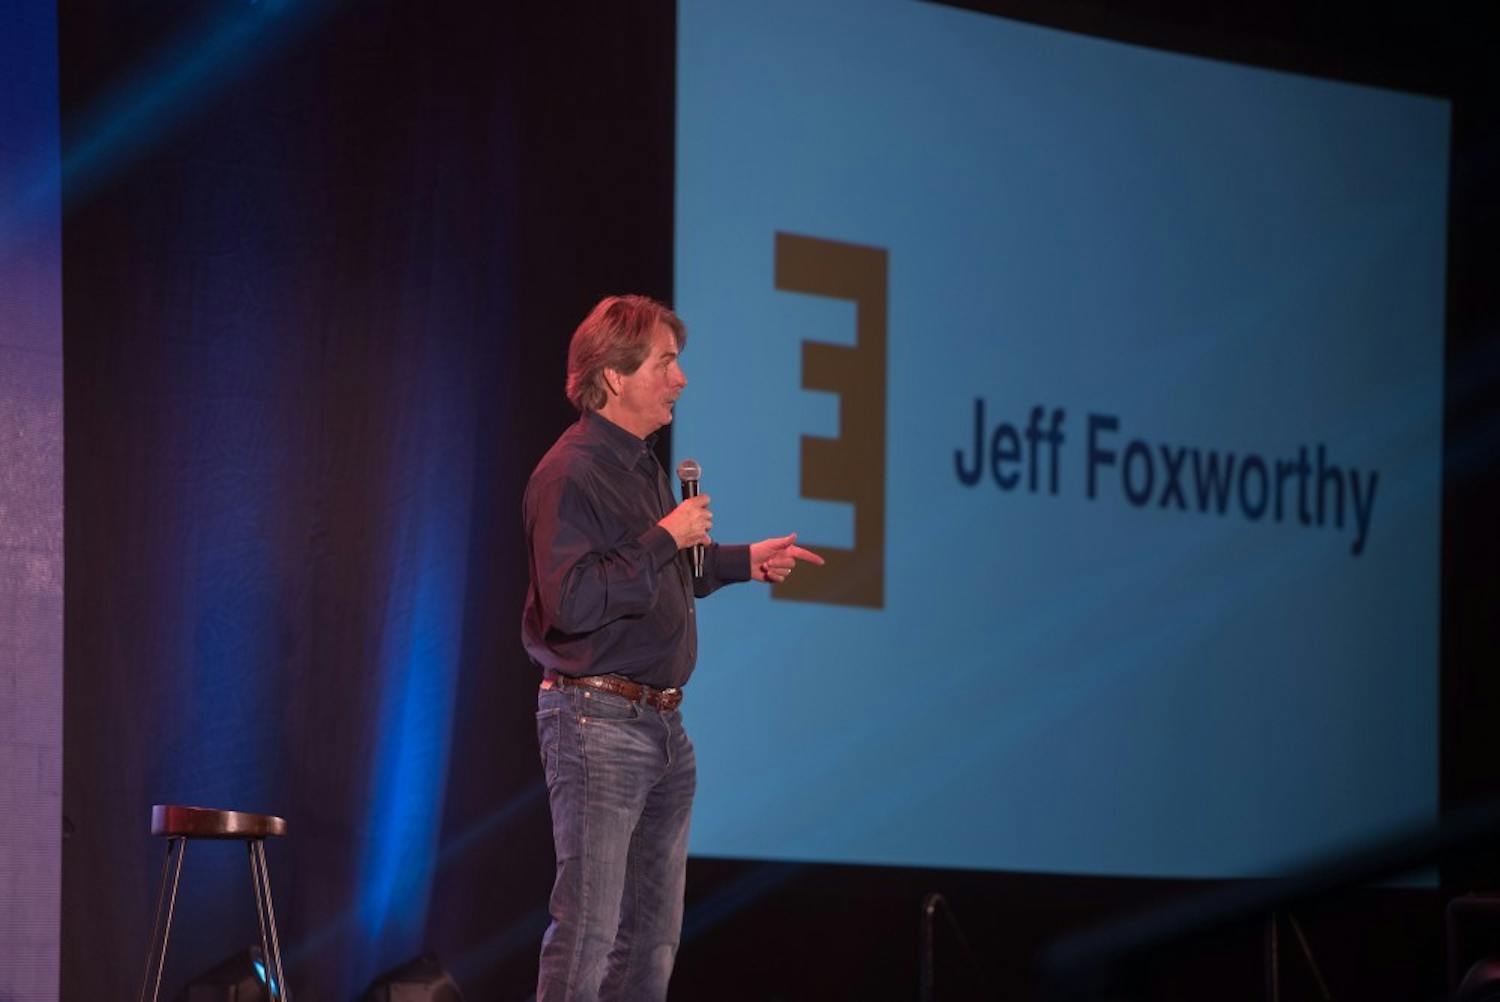 Jeff Foxworthy speaks at the kick-off event for Emerge, the comprehensive leadership program that replaced Freshman Leadership Programs, in Auburn, Ala., on Sunday, Aug. 27, 2017.